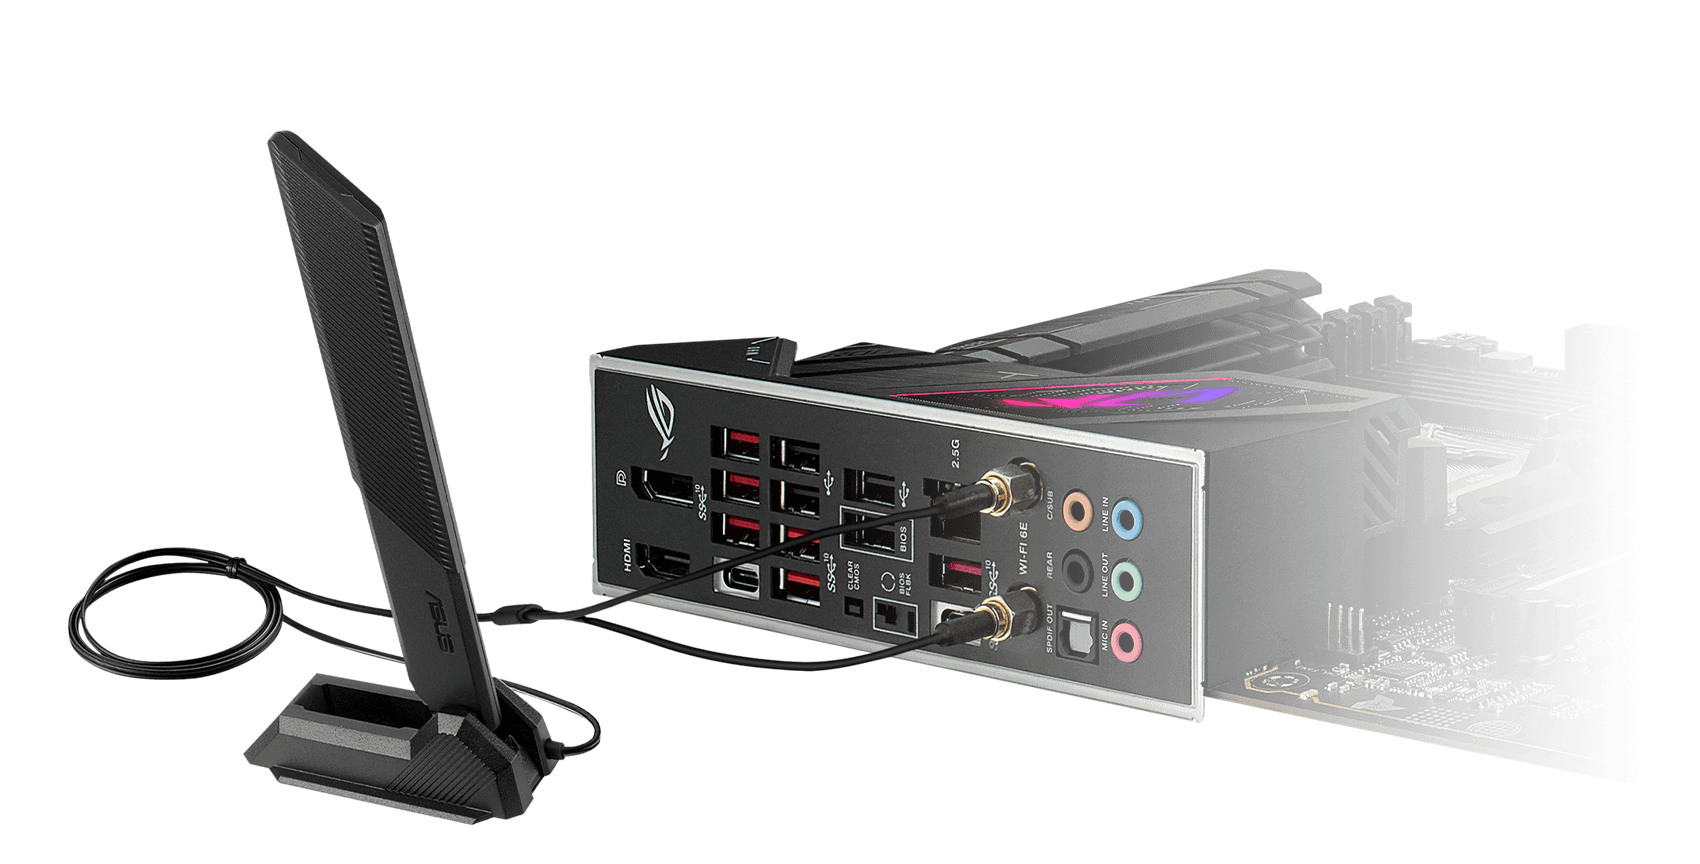 ROG Strix B650E-E features WiFi 6E, an included antenna, and 2.5 Gb ethernet